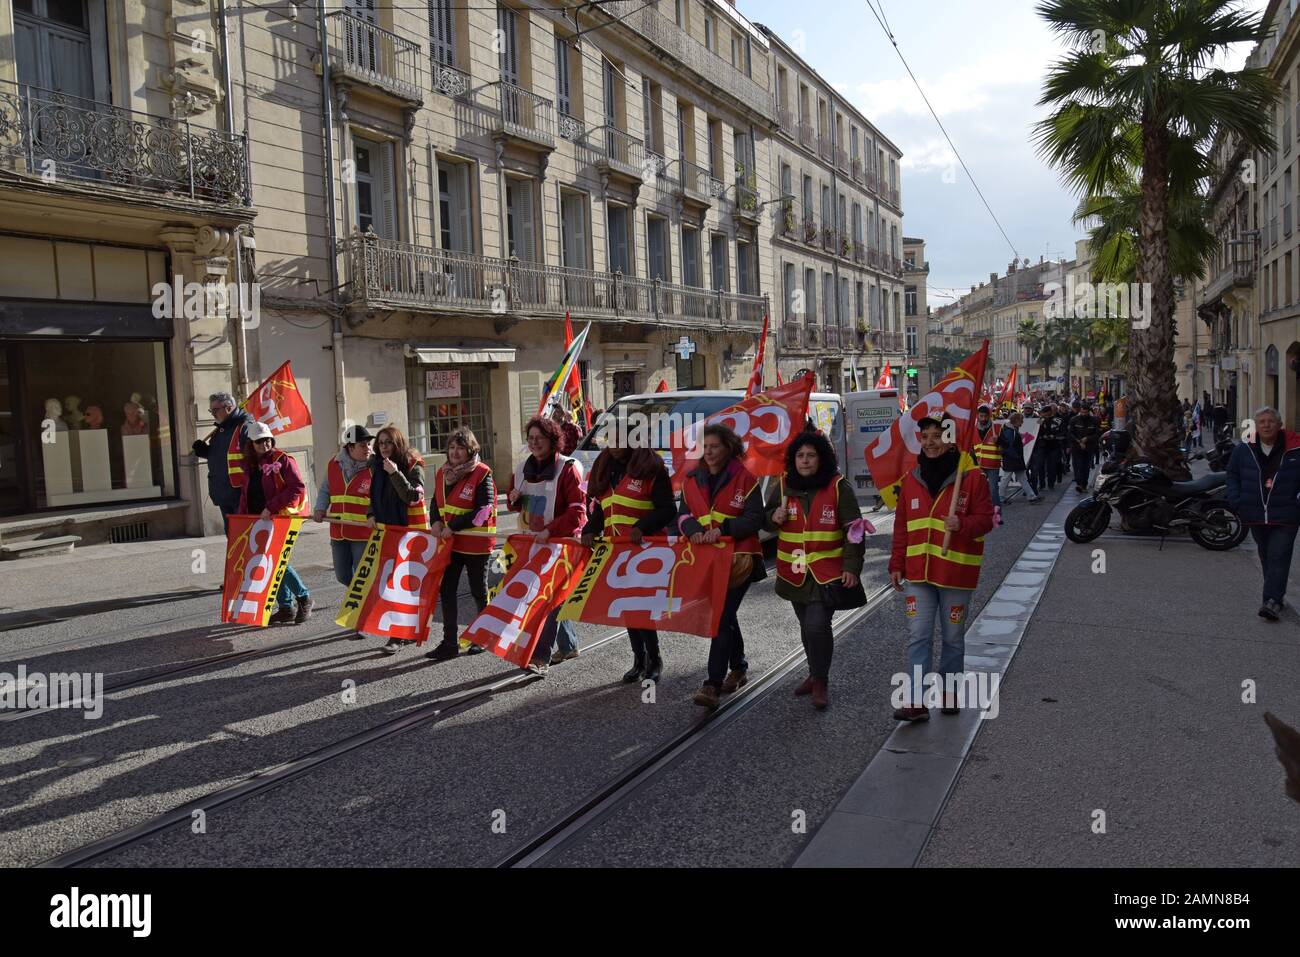 Montpellier, France. 14th January 2020. A large march and demonstration against President Macron's planned pension reform takes place through the city centre. HUndreds of protestors took to the streets, including teachers, telecoms workers and lawyers.  G.P Essex/Alamy Live News Stock Photo